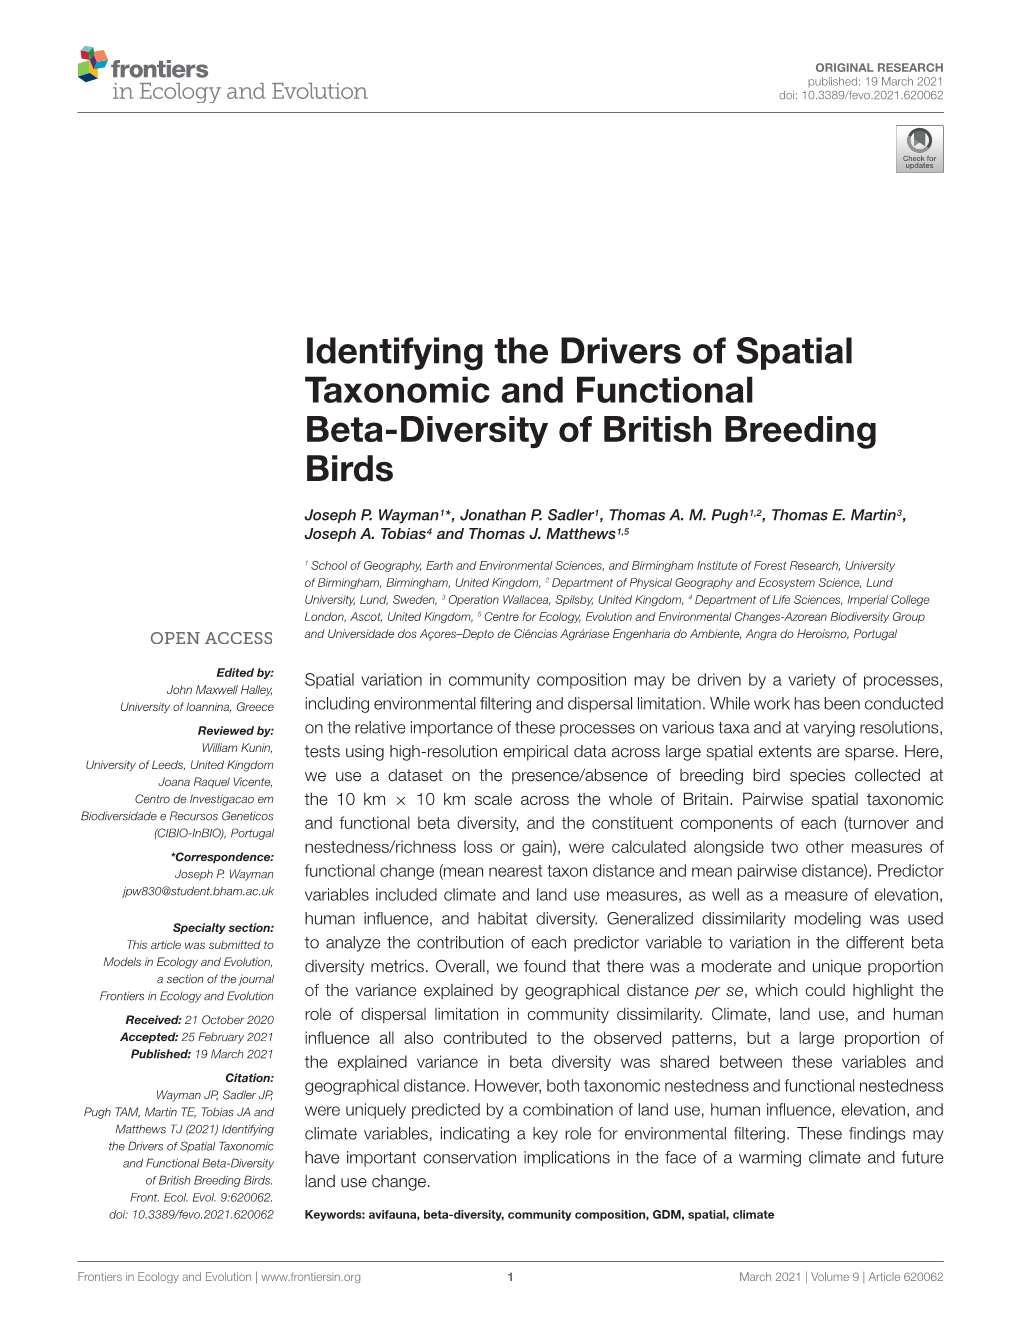 Identifying the Drivers of Spatial Taxonomic and Functional Beta-Diversity of British Breeding Birds